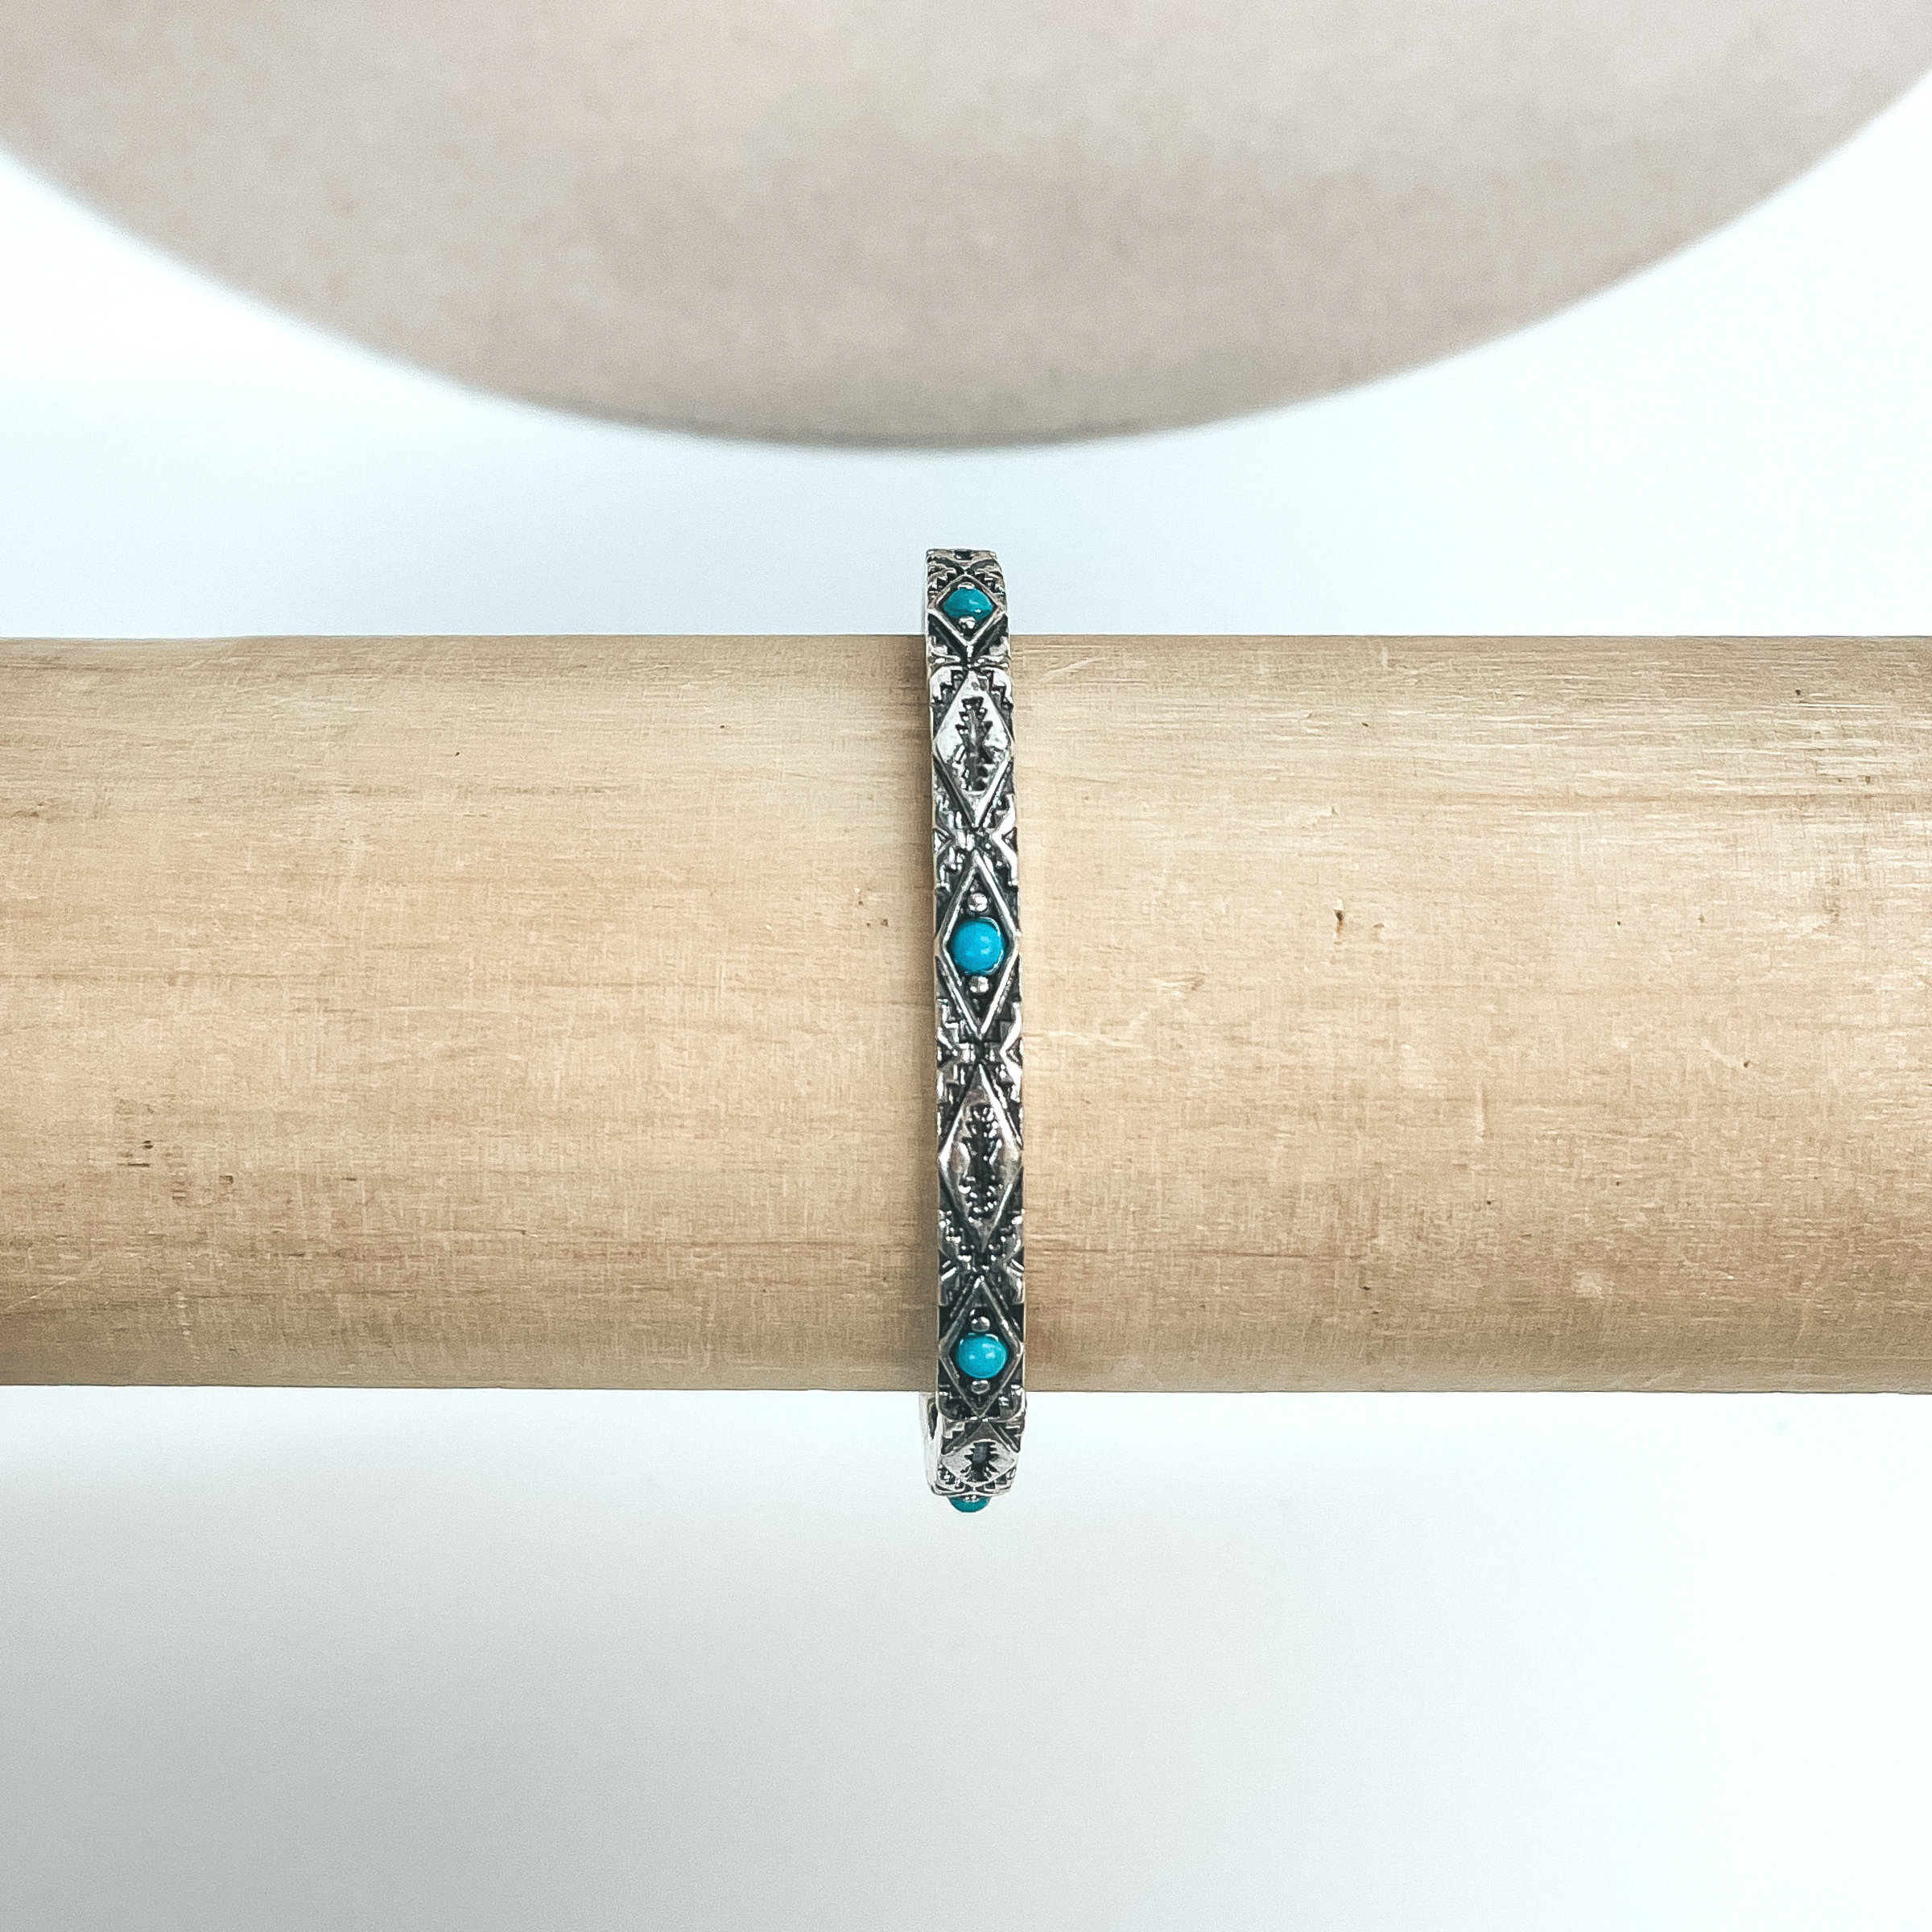 This is a thin silver bracelet with Aztec engraved design and small  turquoise stones all around in the center. These earrings are taken on a  light brown bracelet holder and on  a white background with a beige hat in the back as decor.